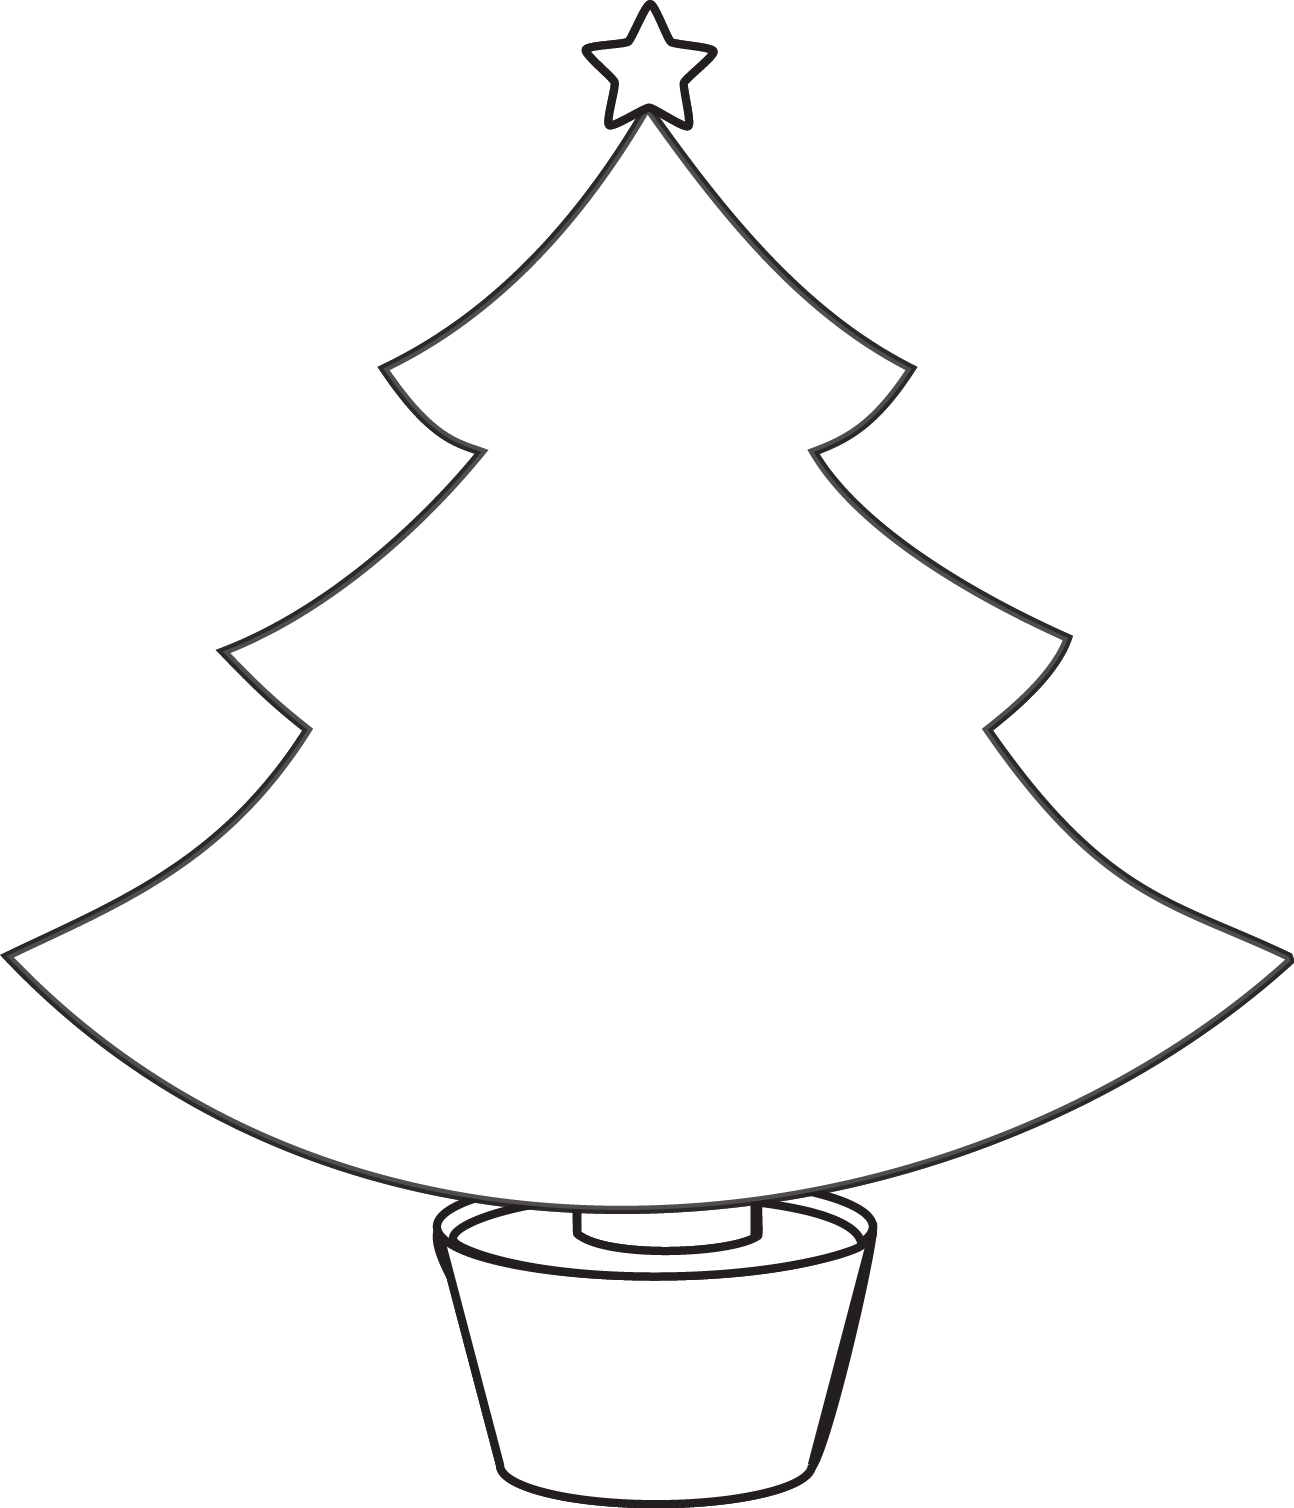 Pattern Christmas Star Clipart - Clipart Kid